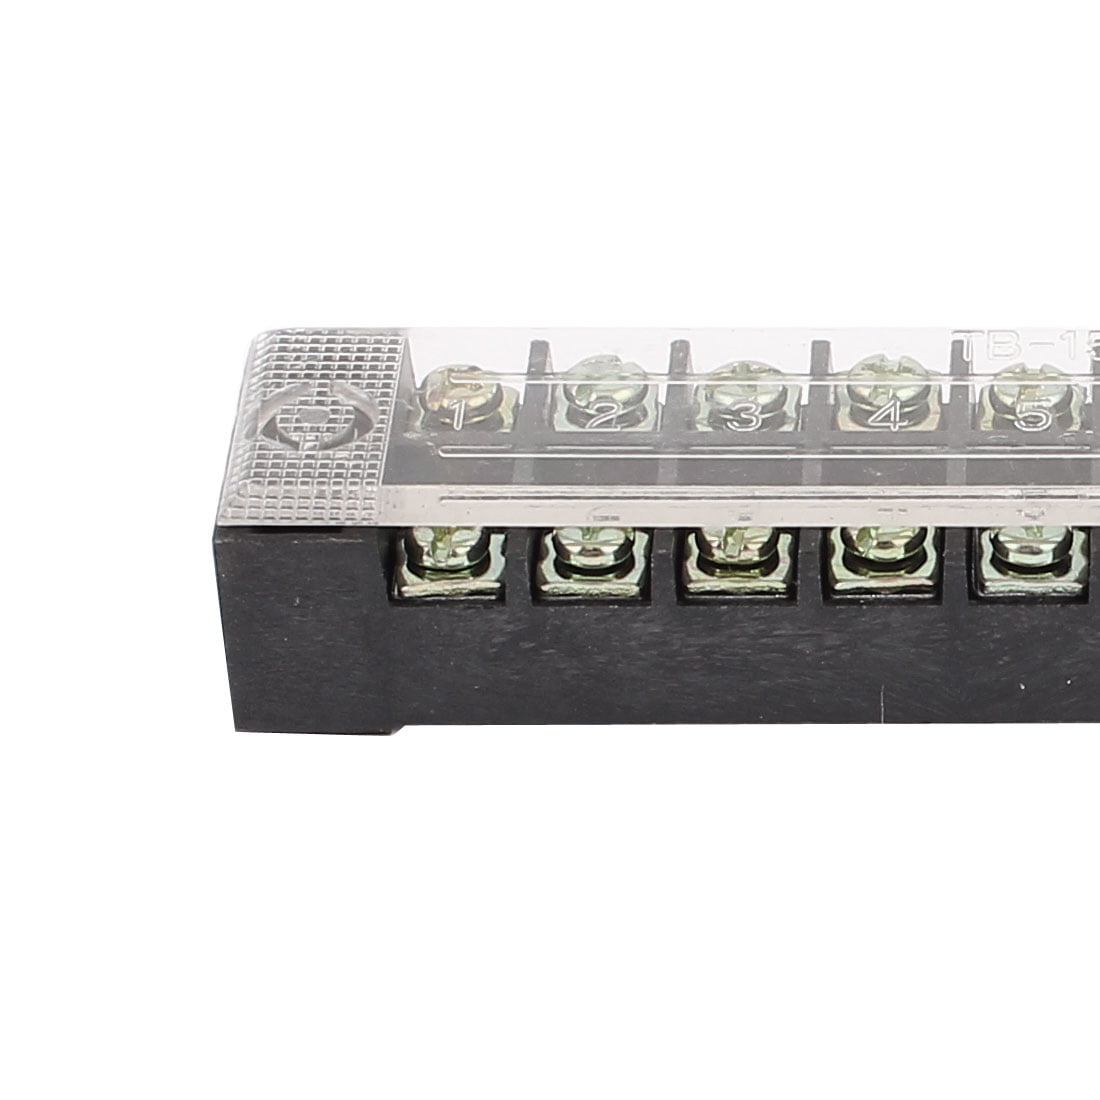 LDEXIN 5pcs 600V 15A Dual Row 12 Position Covered Screw Terminal Wire Electric Barrier Wire Connector Bar Strip Blocks TB-1512L